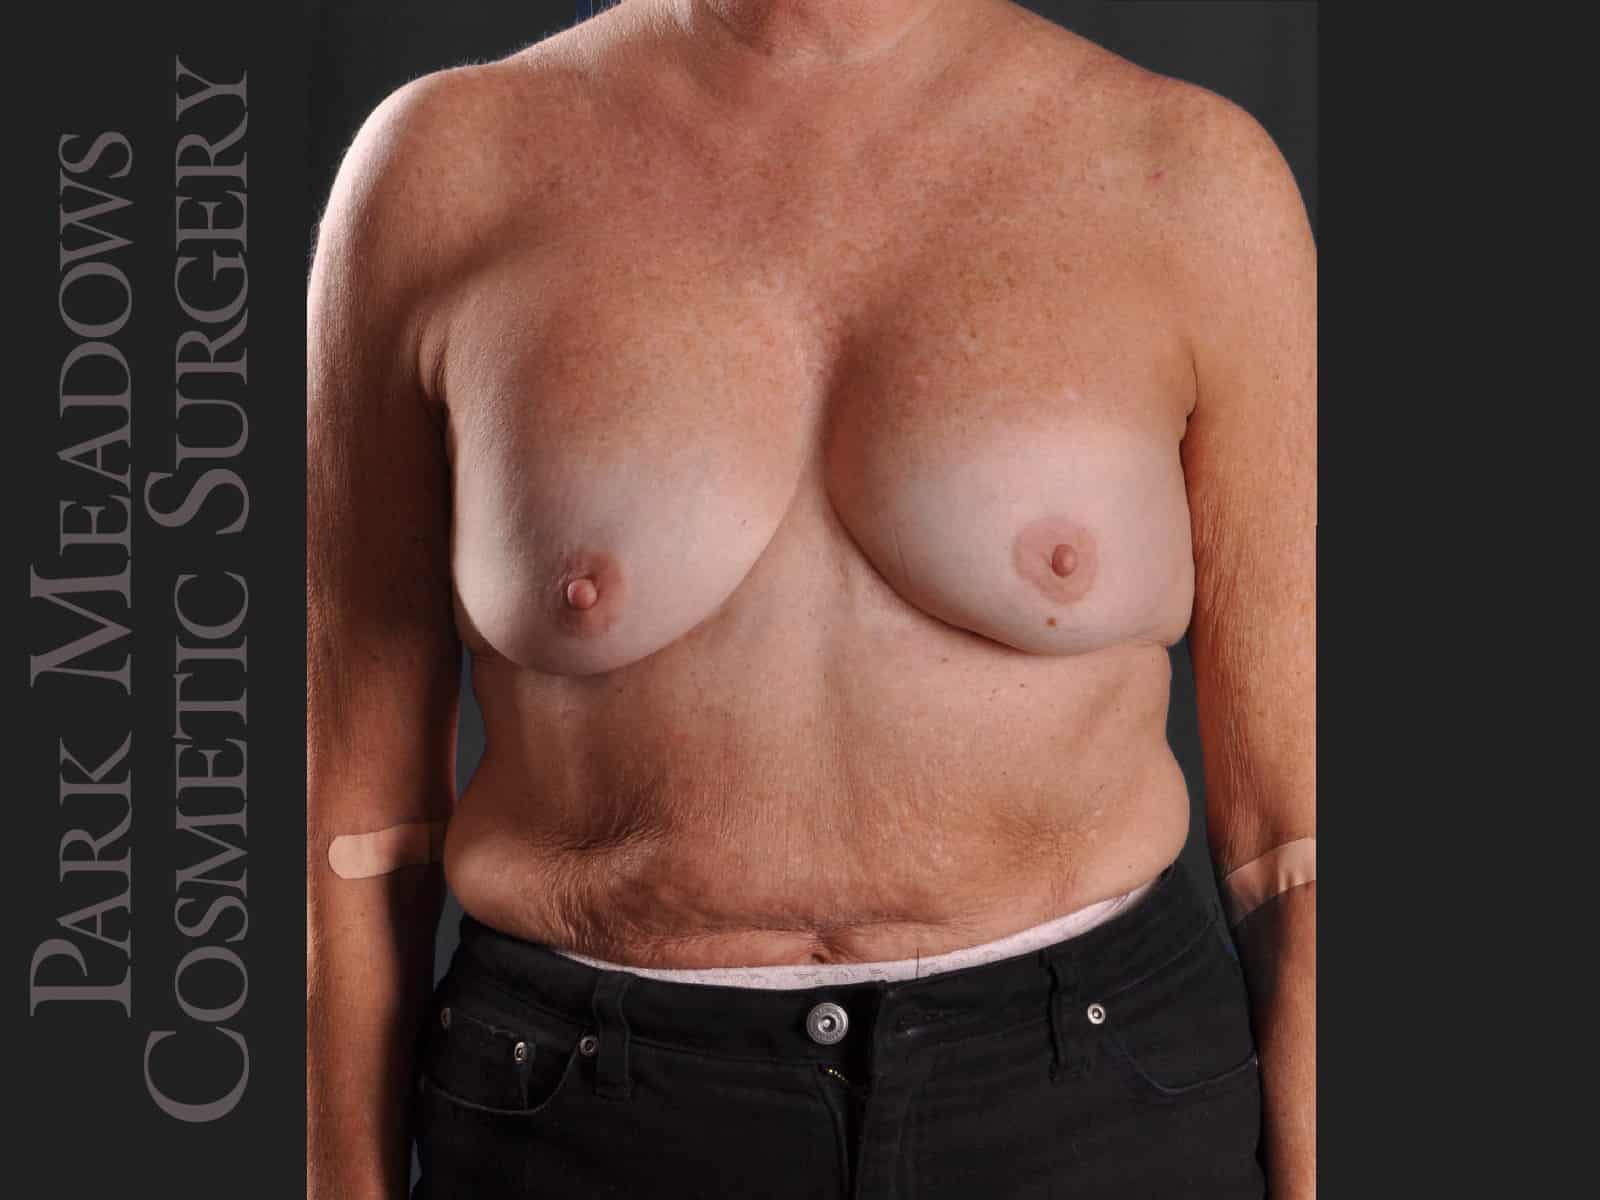 Failed Silicone Implant; Breast Implant Exchange with Capsulectomy; 400cc Silicone Implants